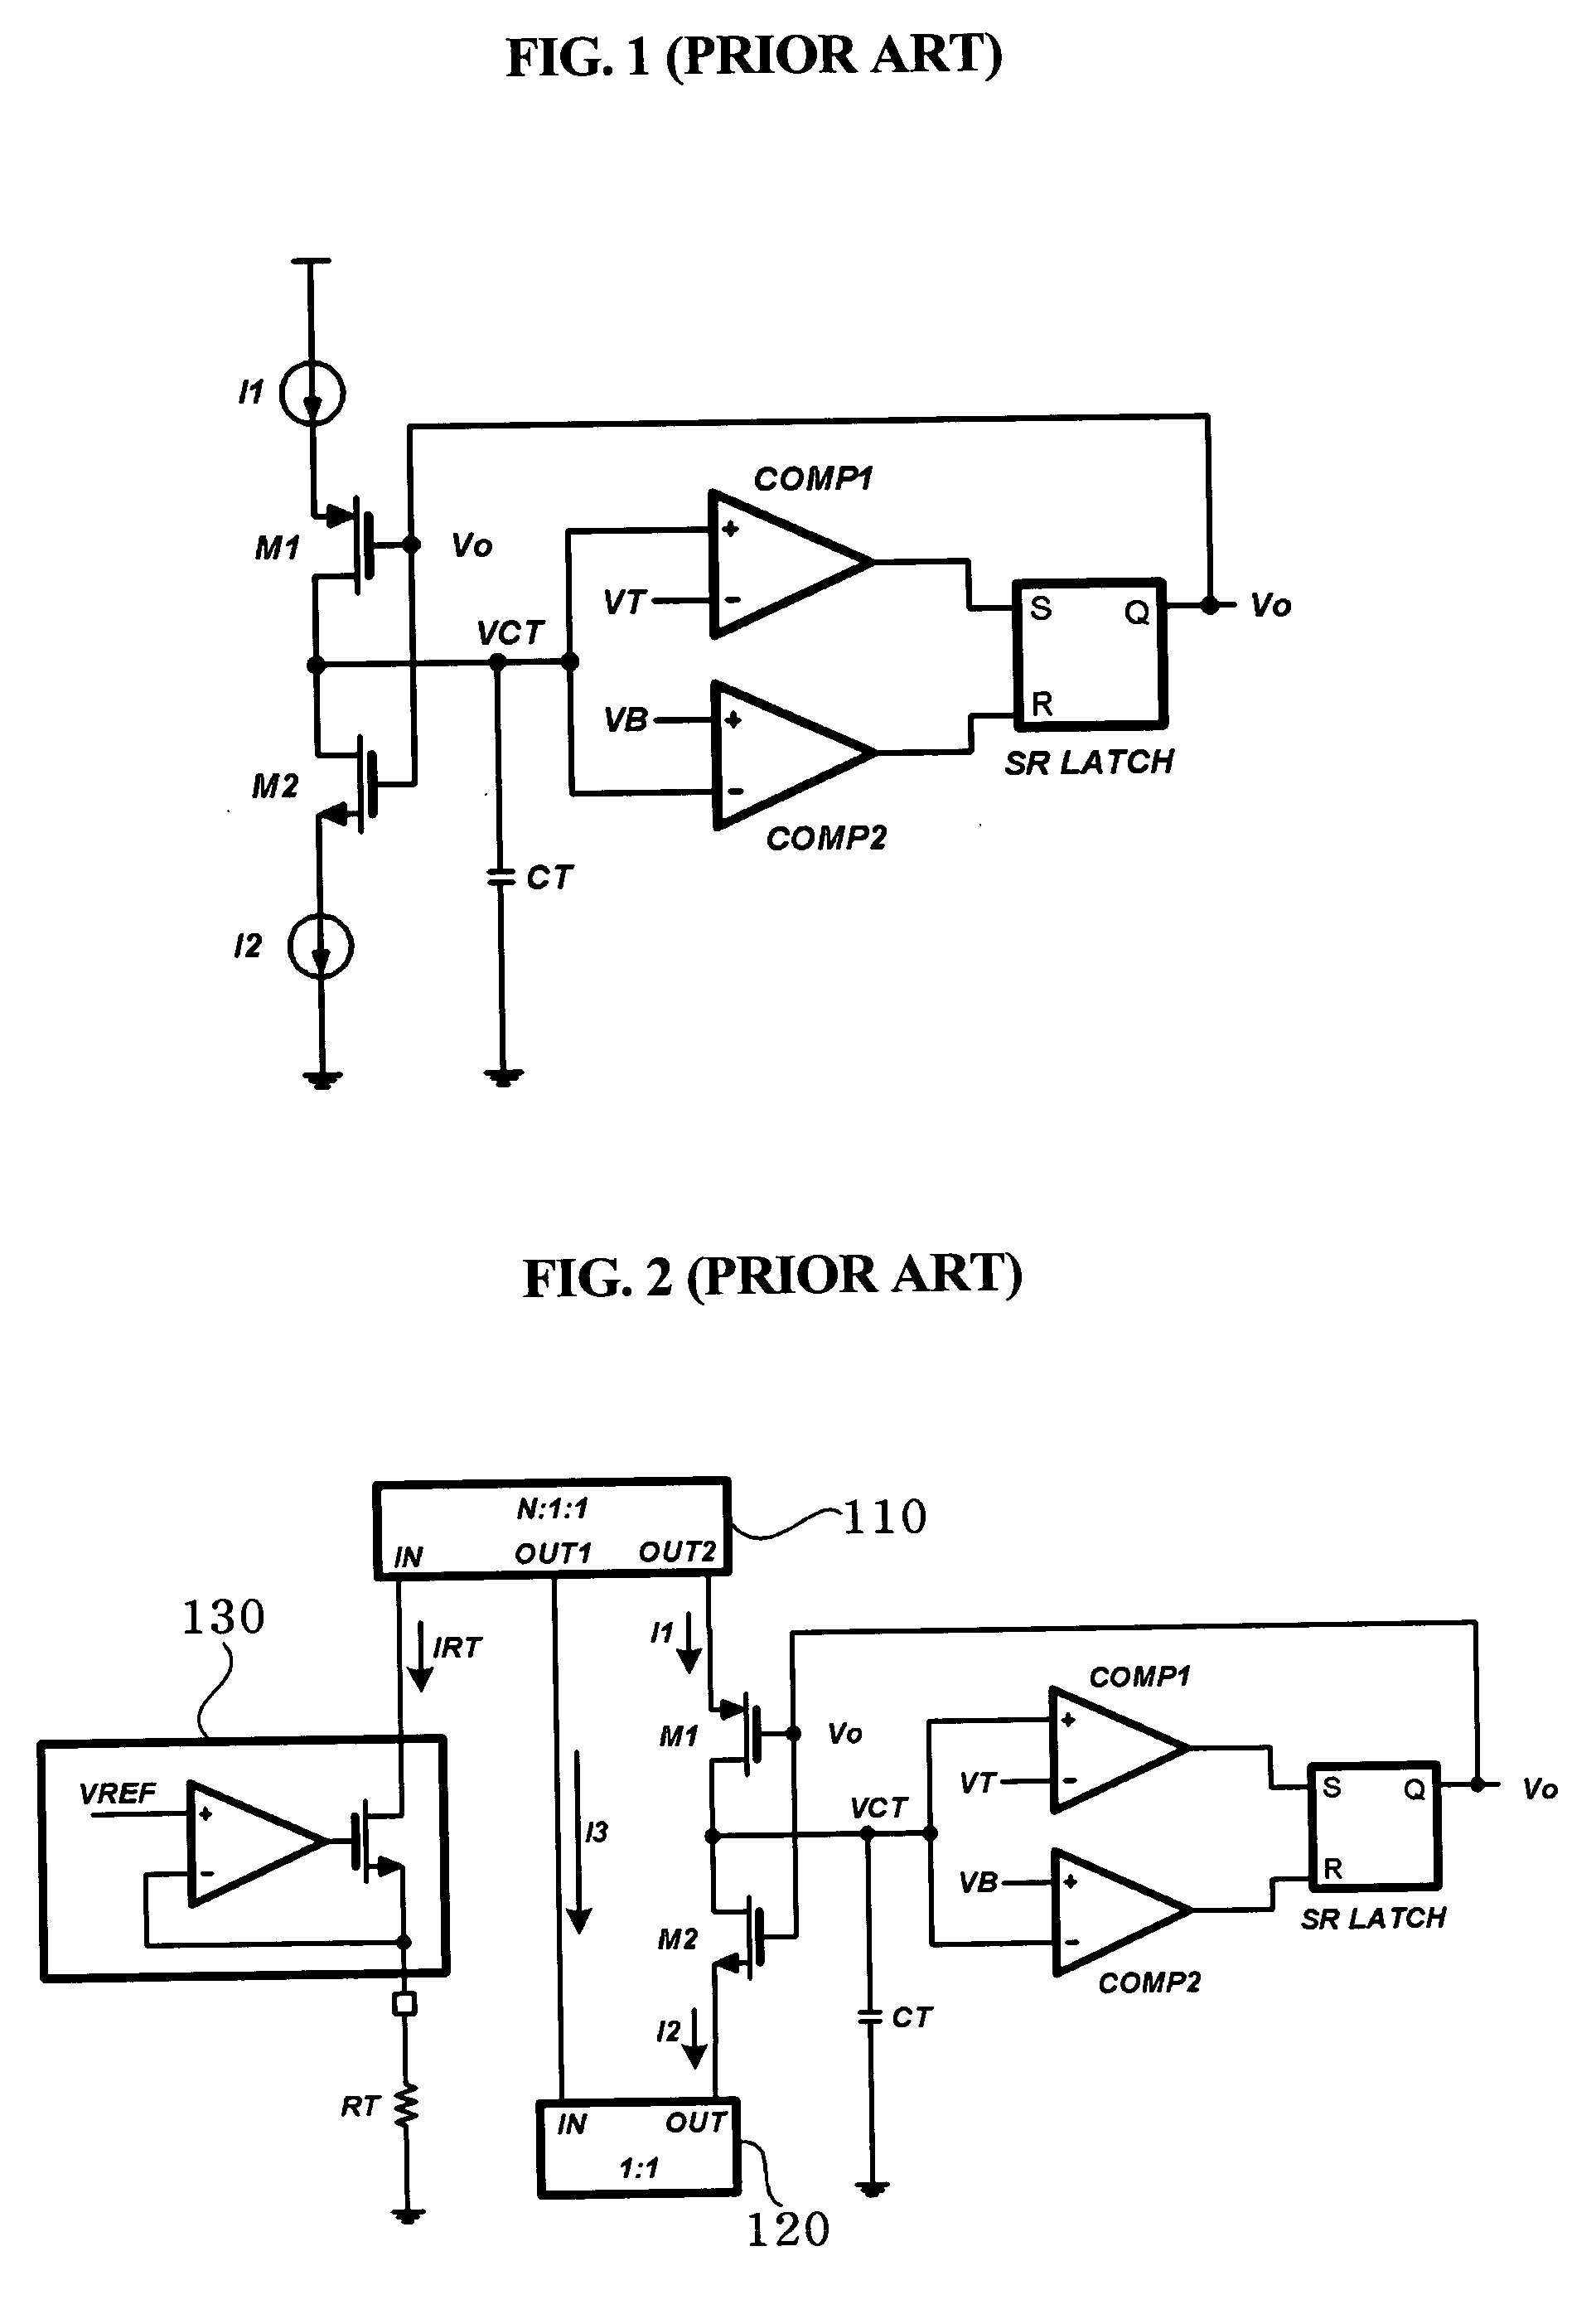 RC oscillator integrated circuit including capacitor